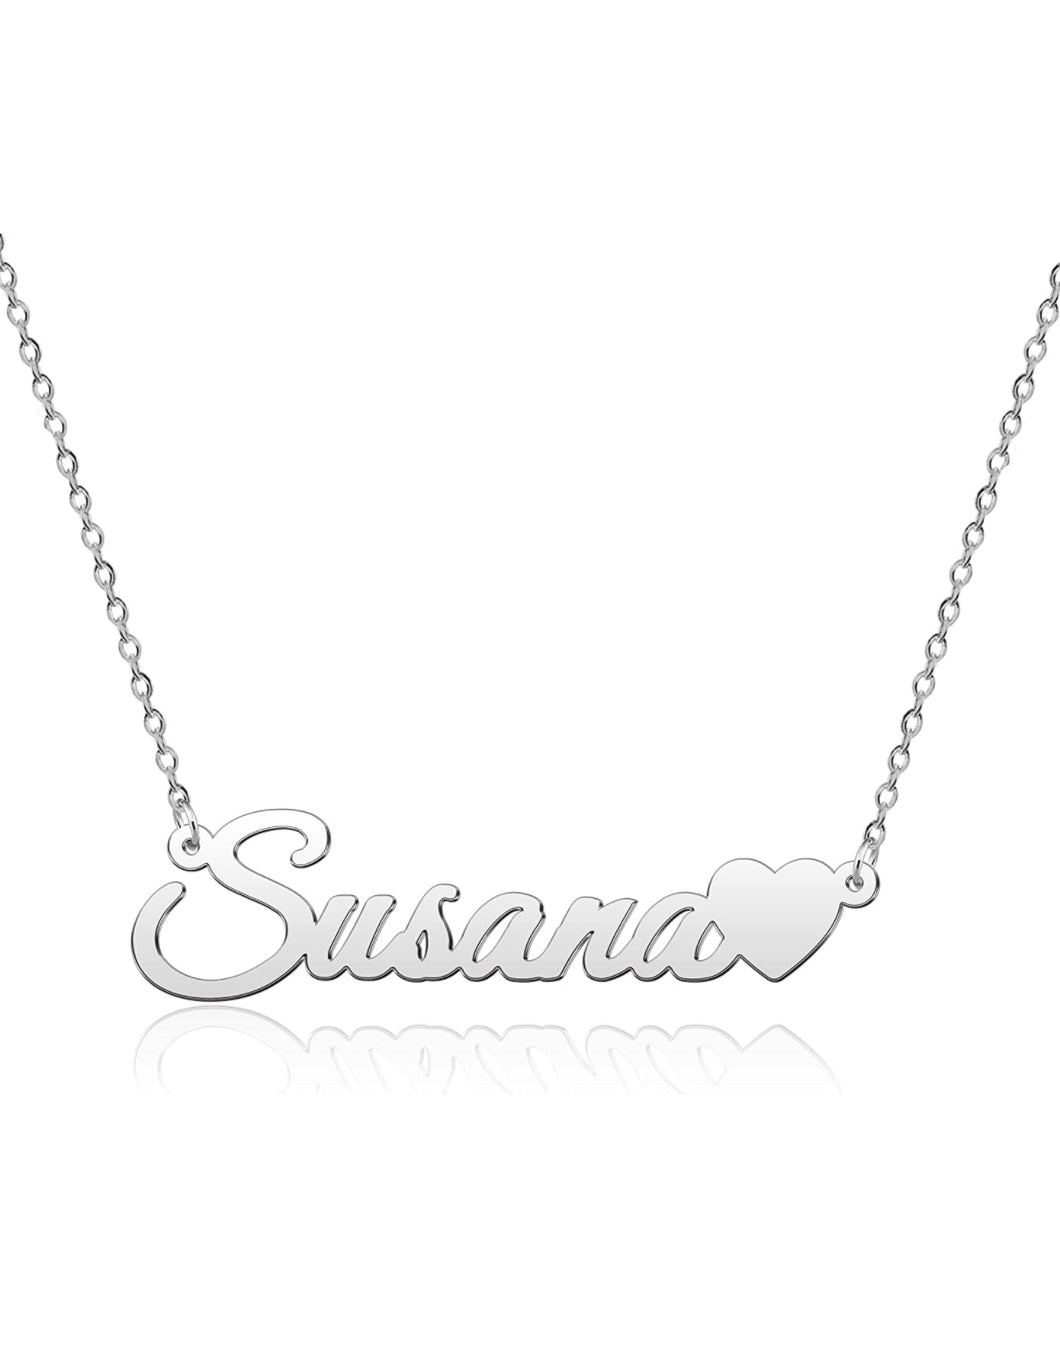 Customized Name Necklace with Heart